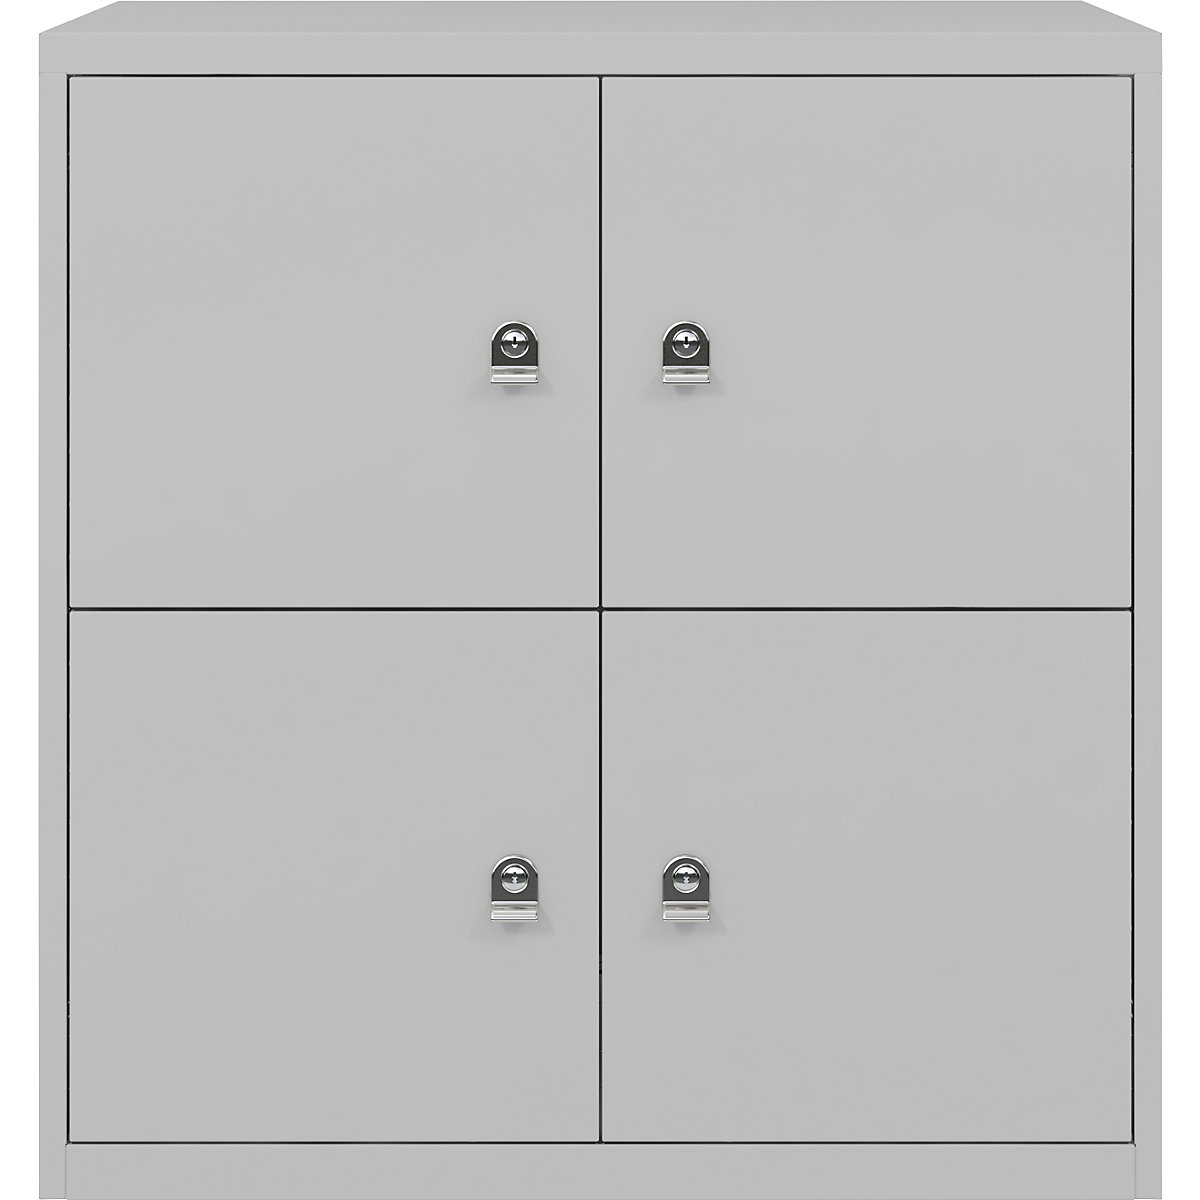 BISLEY – LateralFile™ lodge, with 4 lockable compartments, height 375 mm each, goose grey